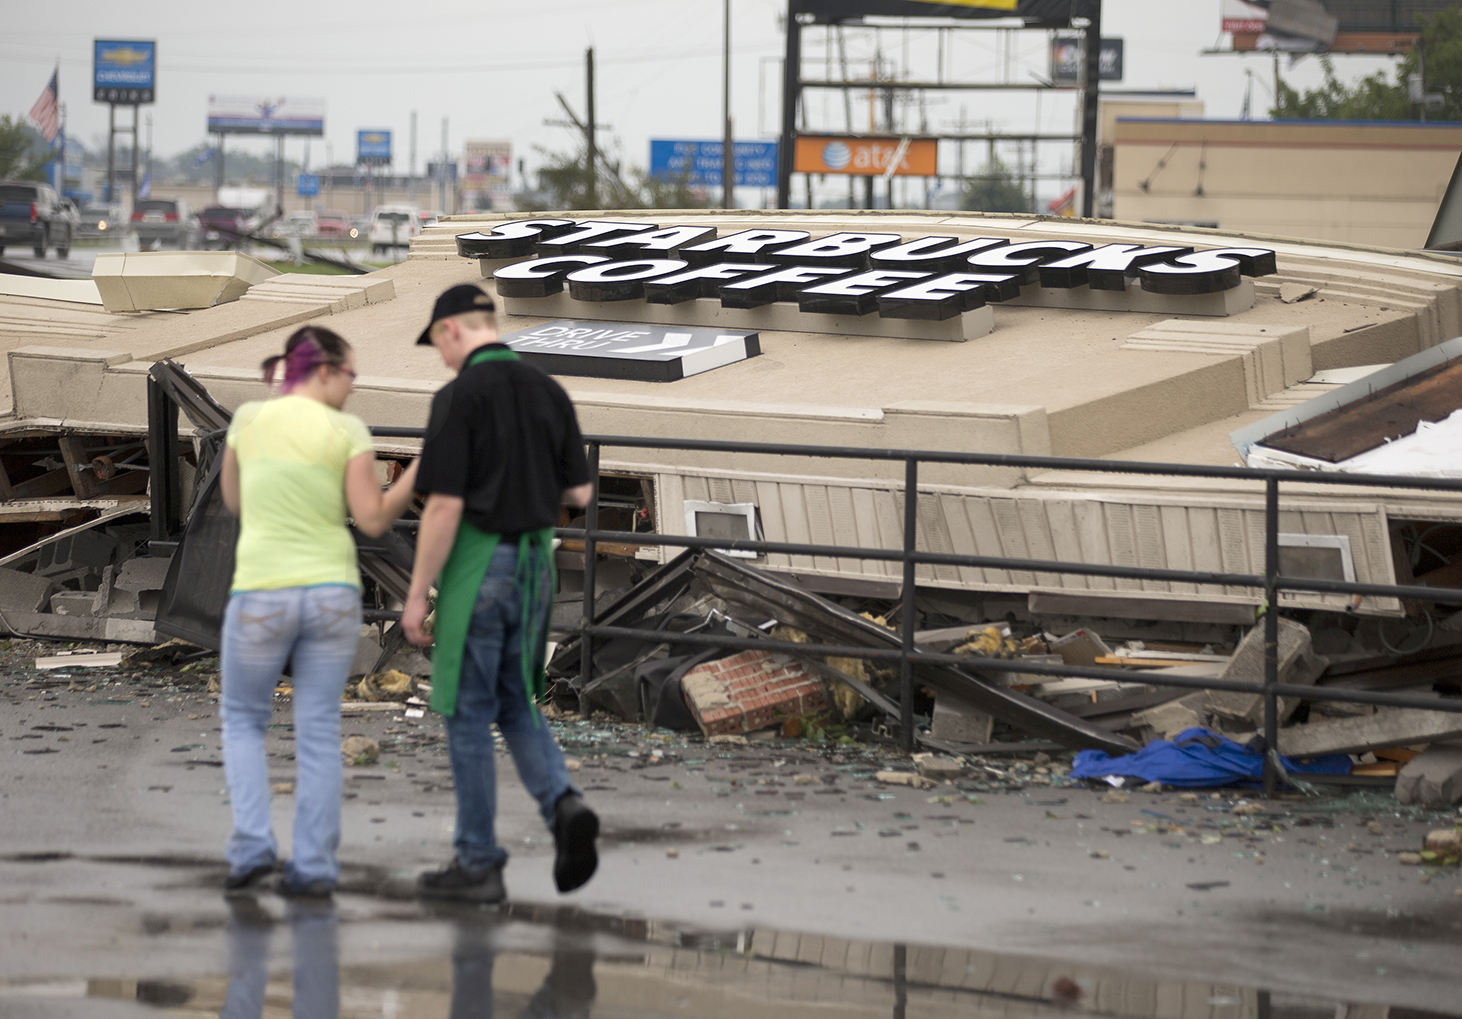 Authorities assess damage left by storms, tornadoes - The Blade1462 x 1019